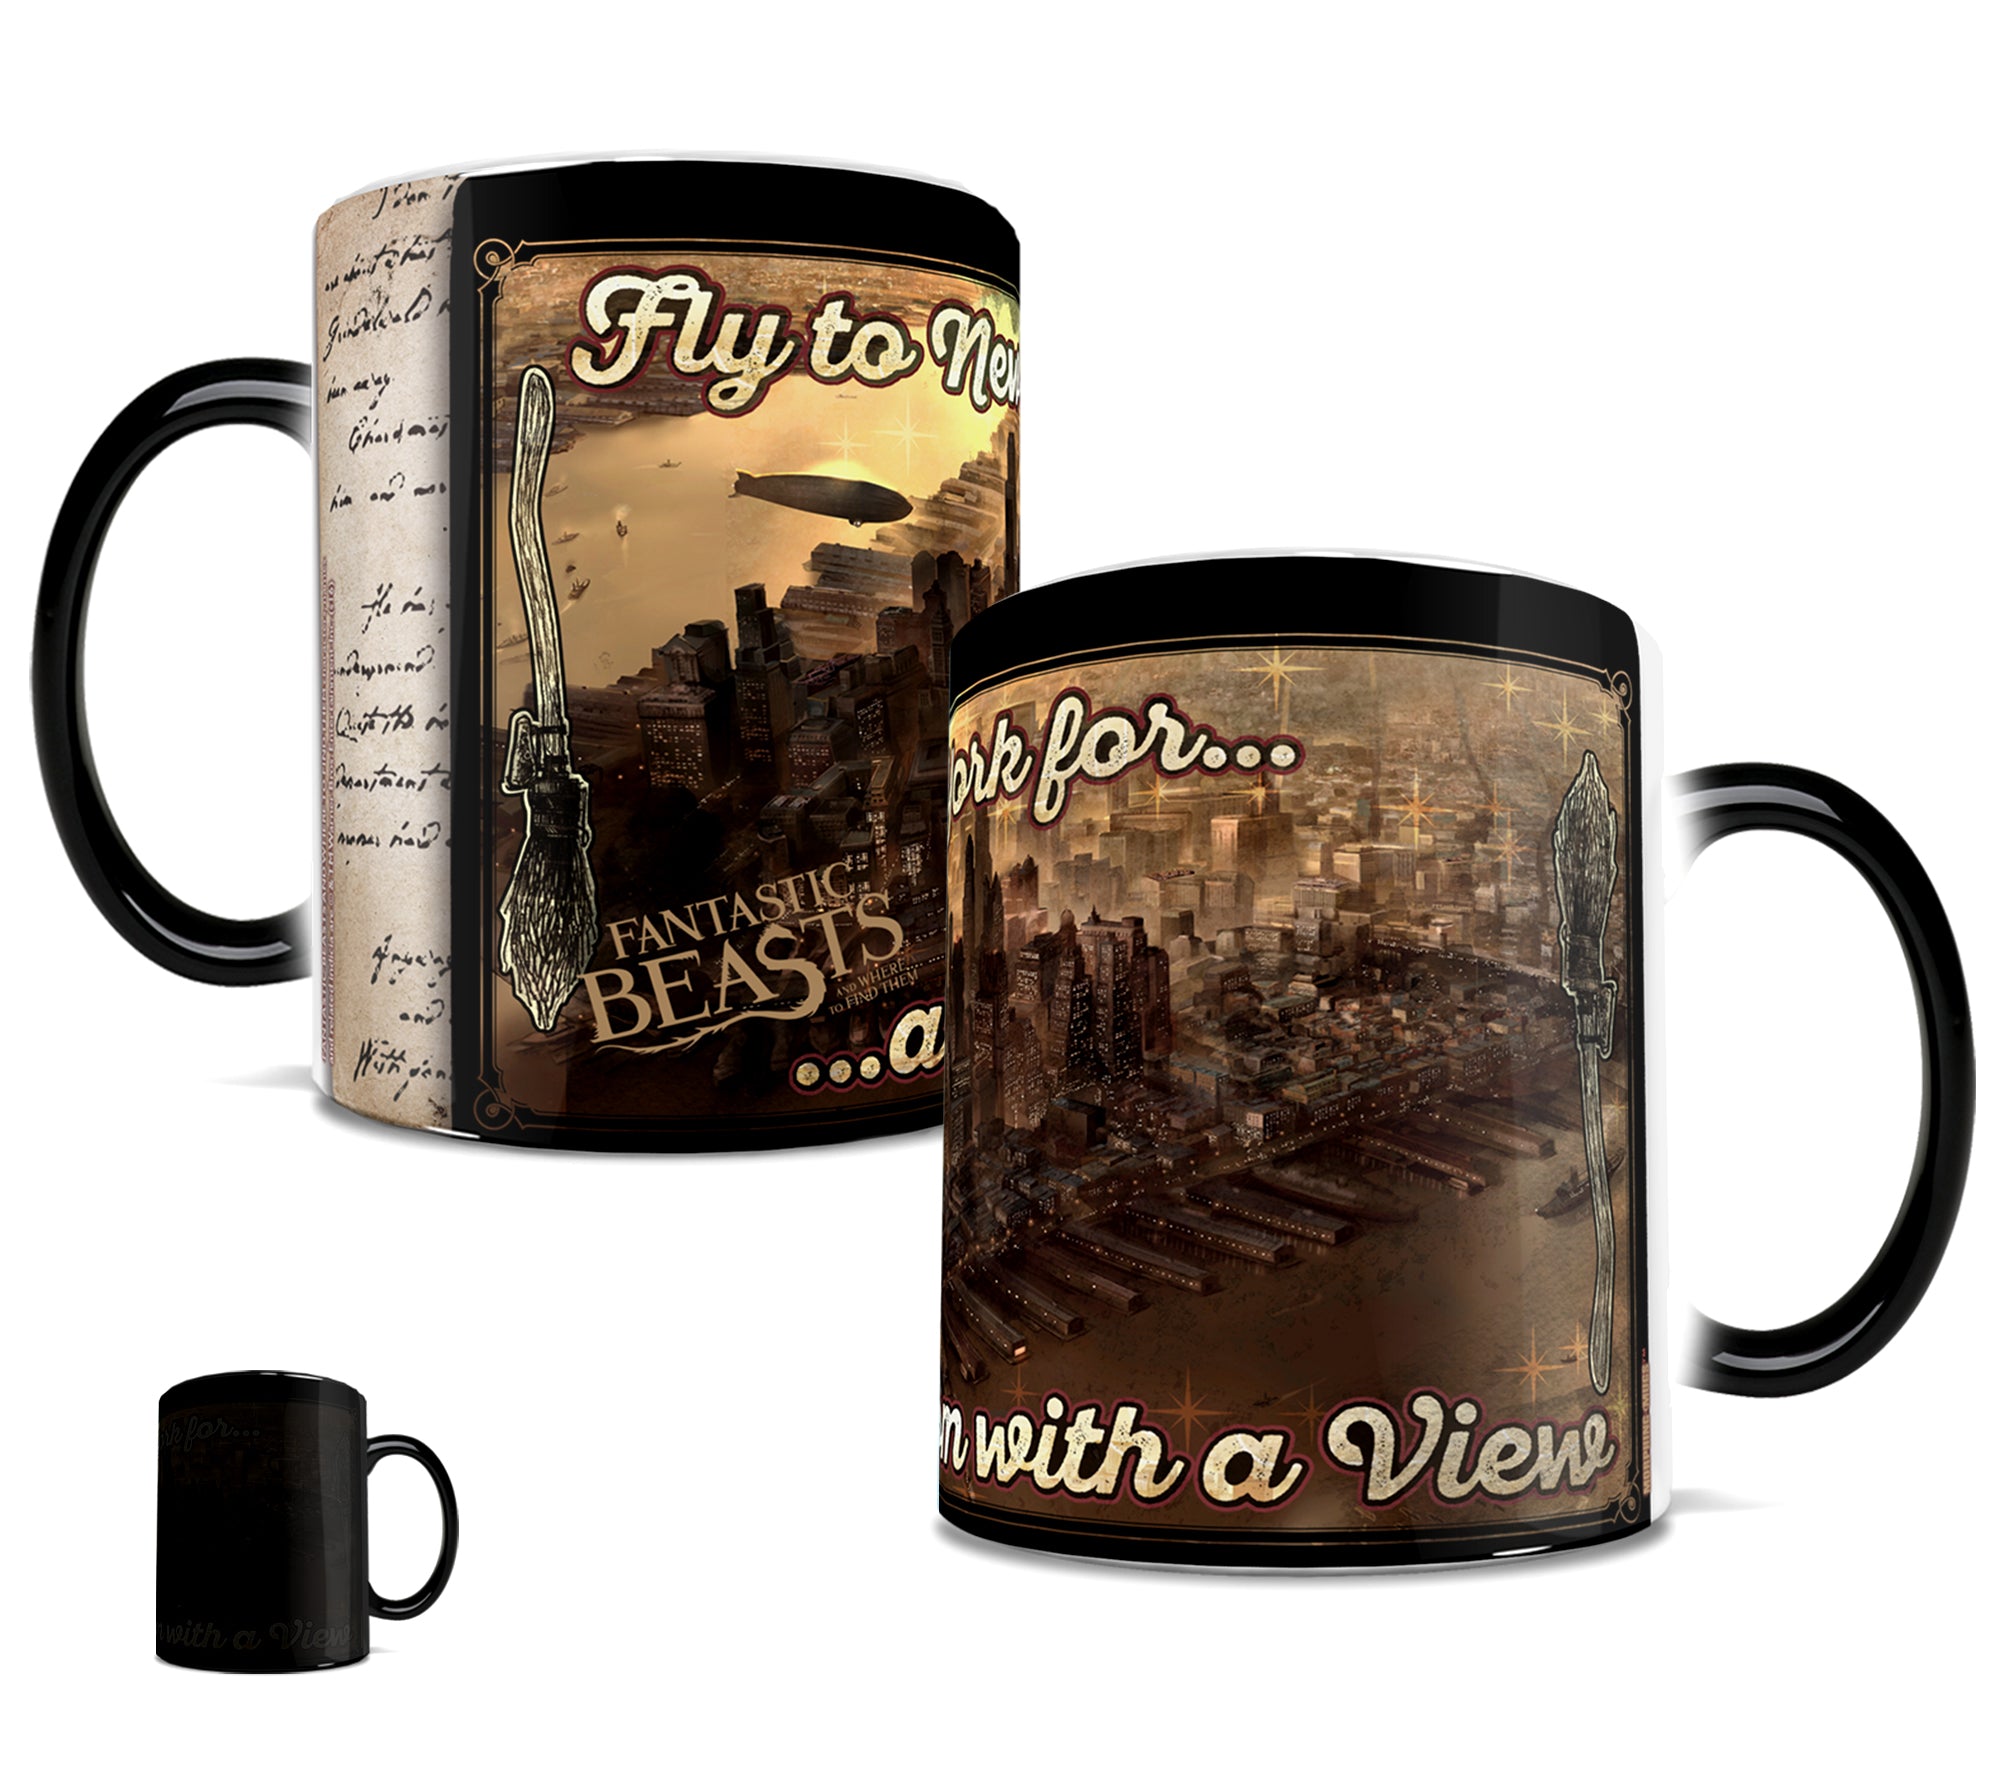 Fantastic Beasts and Where To Find Them (Broom with a View) Morphing Mugs® Heat-Sensitive Mug MMUG408